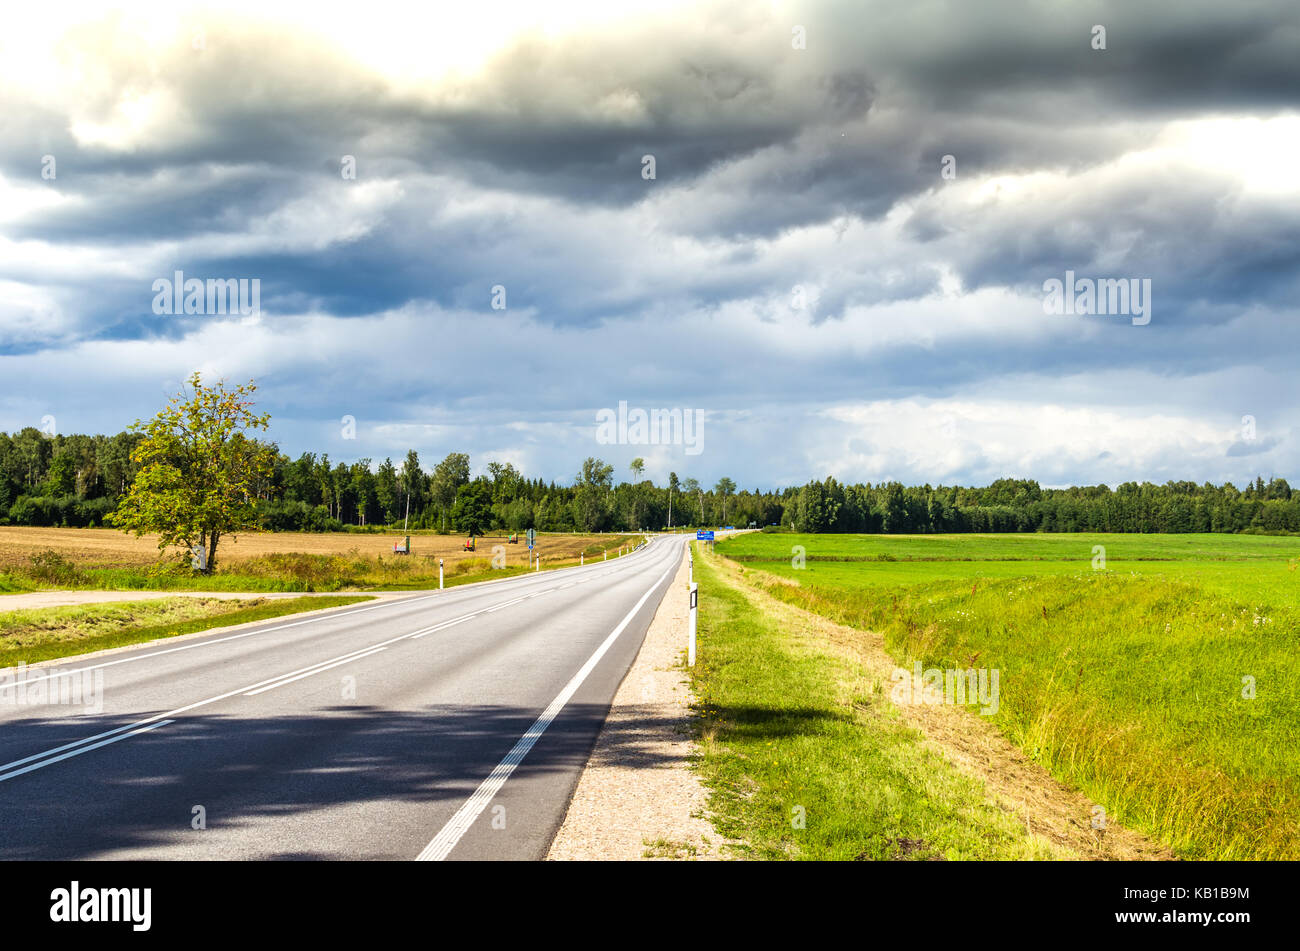 A highway in the countryside n a cloudy day Stock Photo